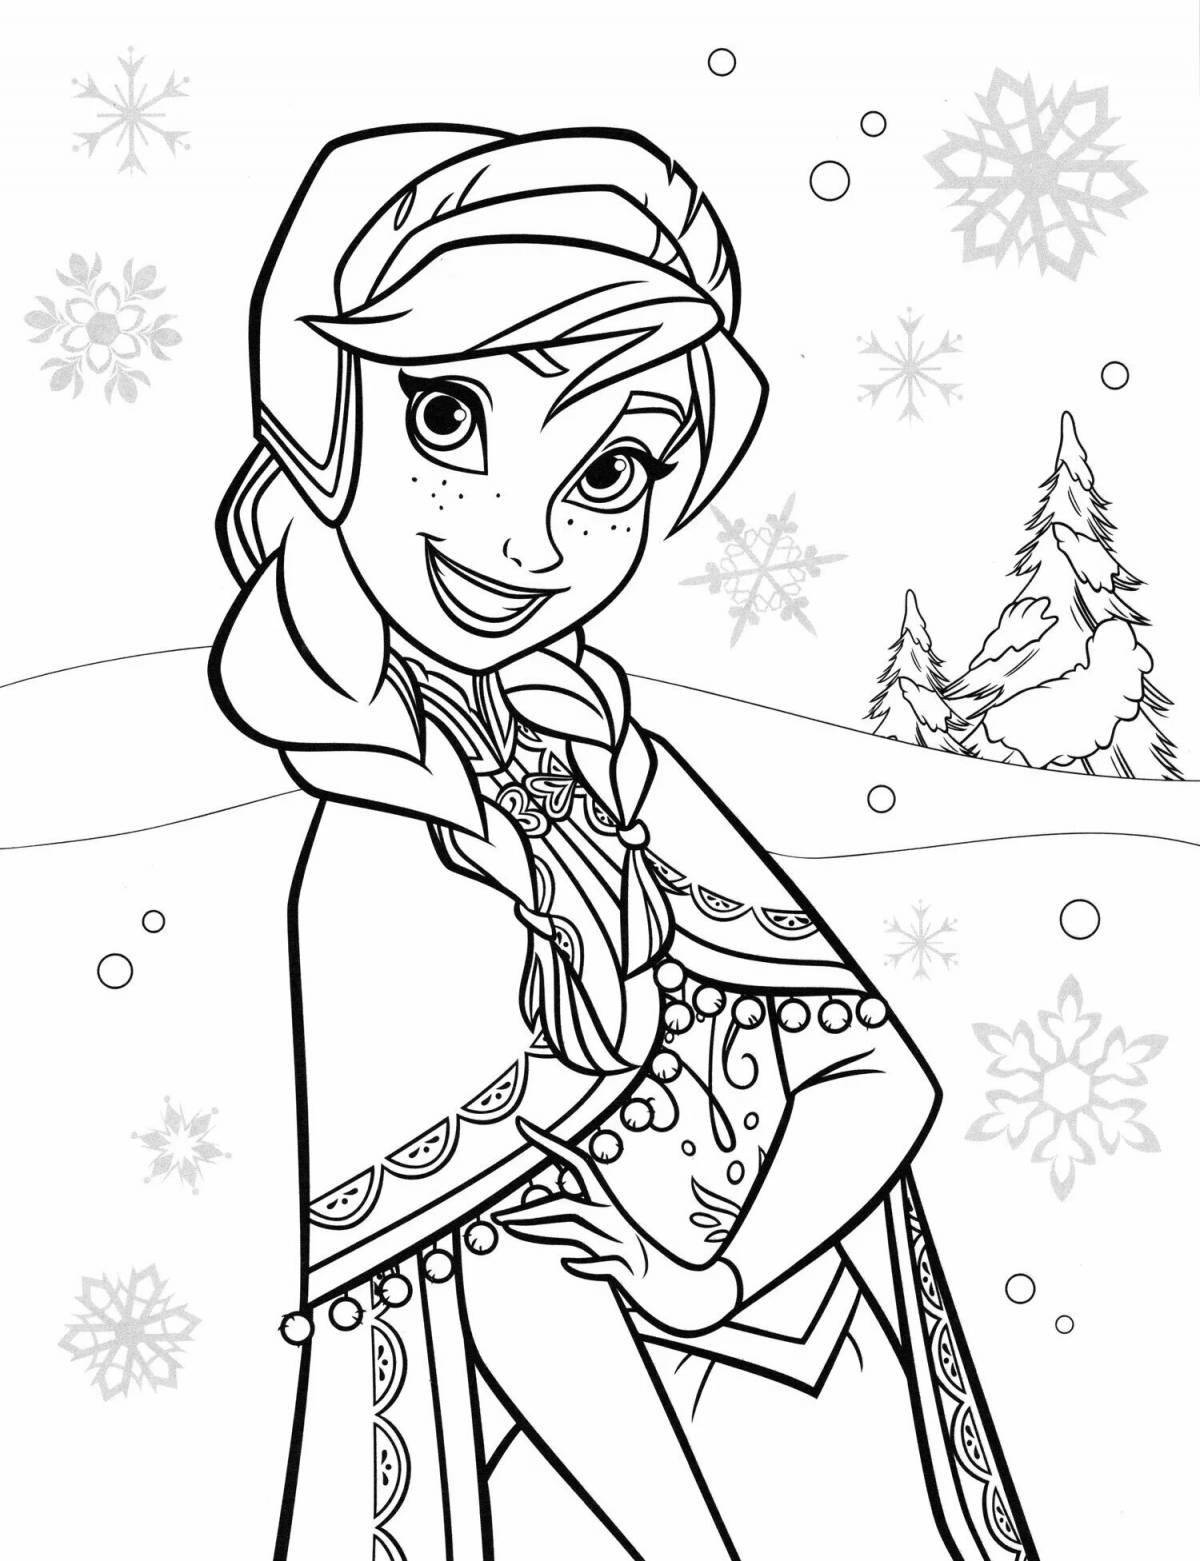 Elsa glitter coloring book for kids 4-5 years old